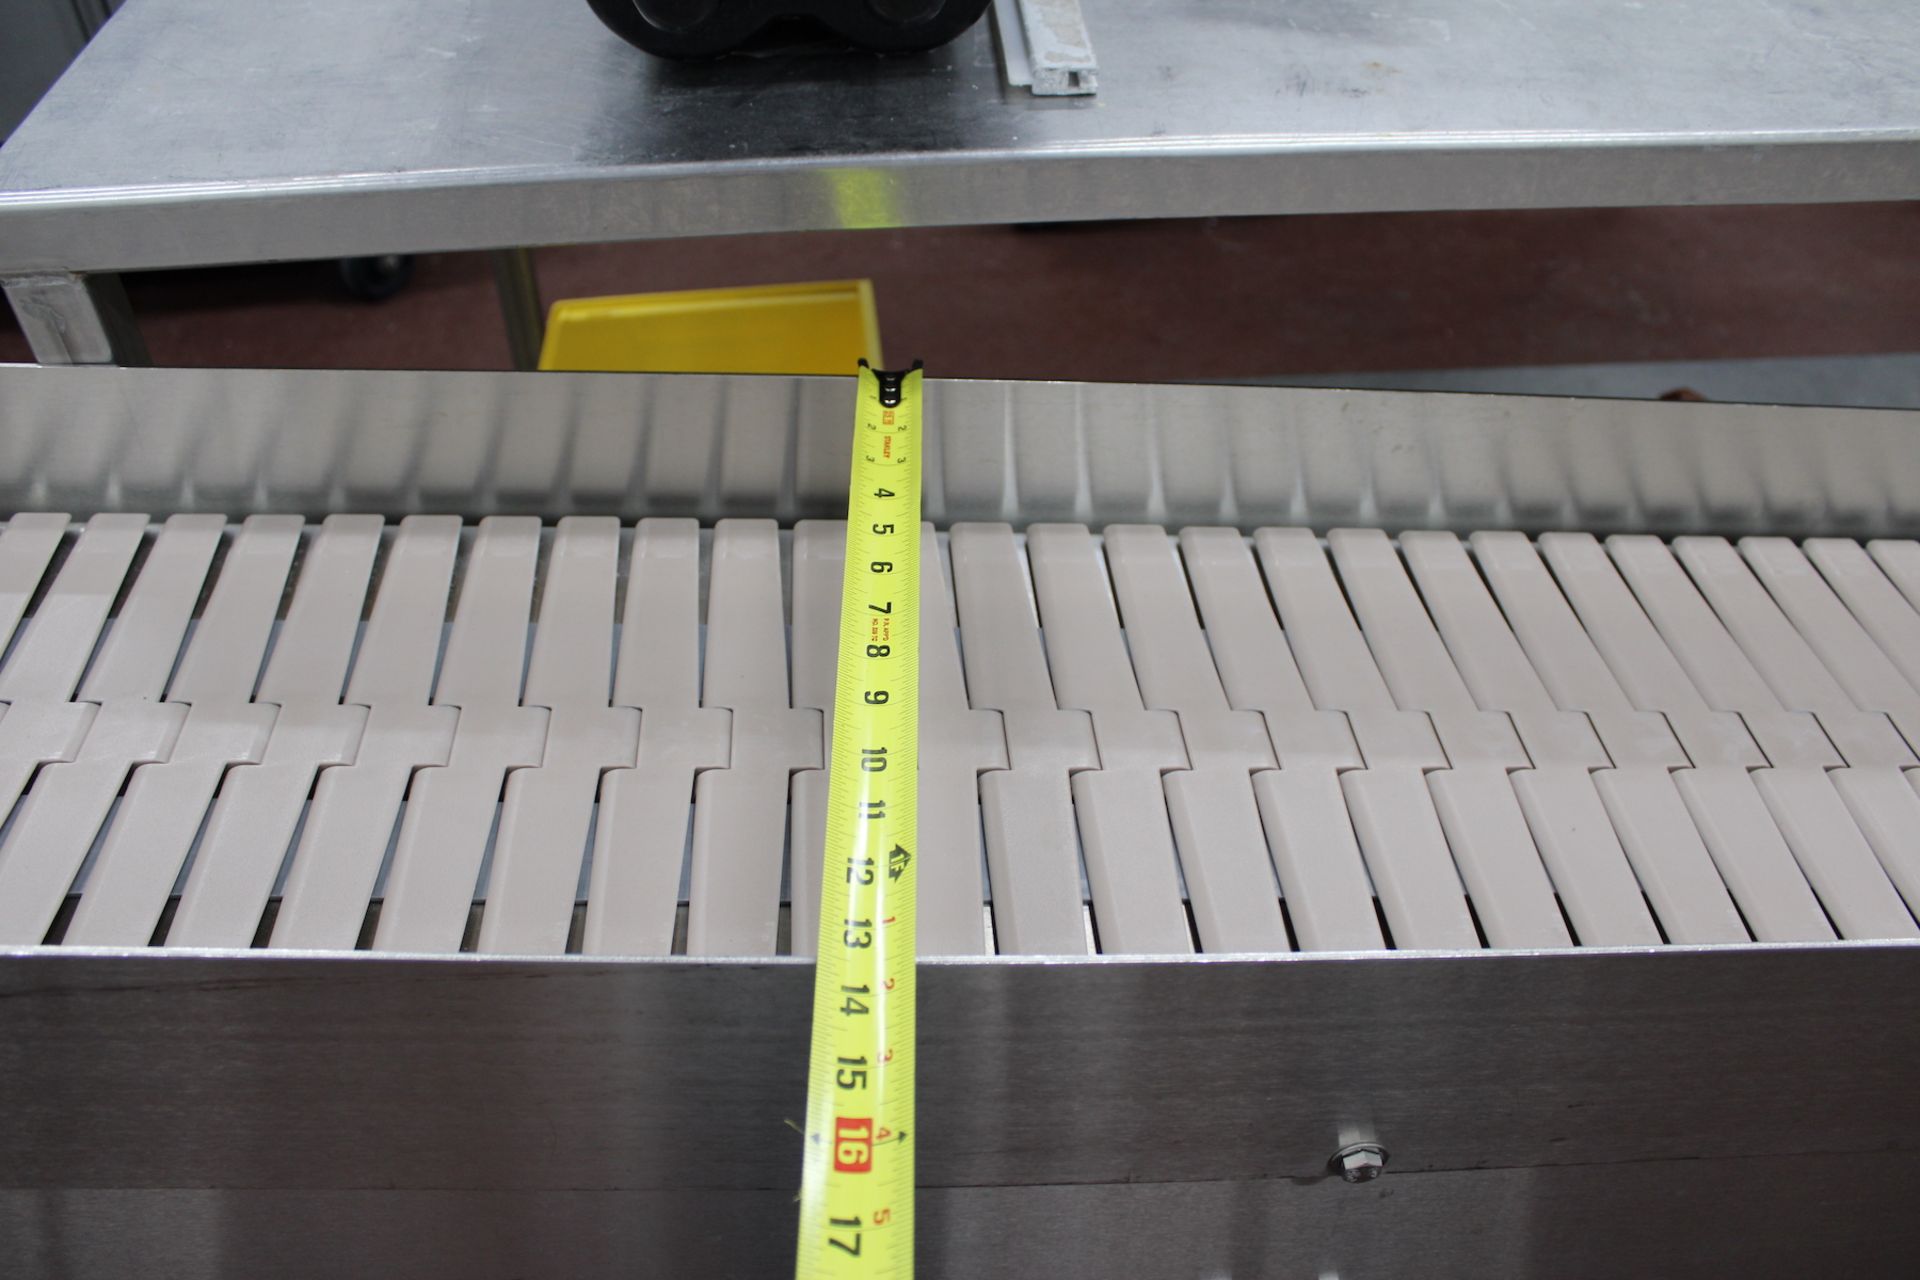 BOSTON CONVEYORS AND AUTOMATION CASE CONVEYOR, APPROX. 470 IN. L X 14 IN W BELT, INCLUDES SWITCH - Image 5 of 6